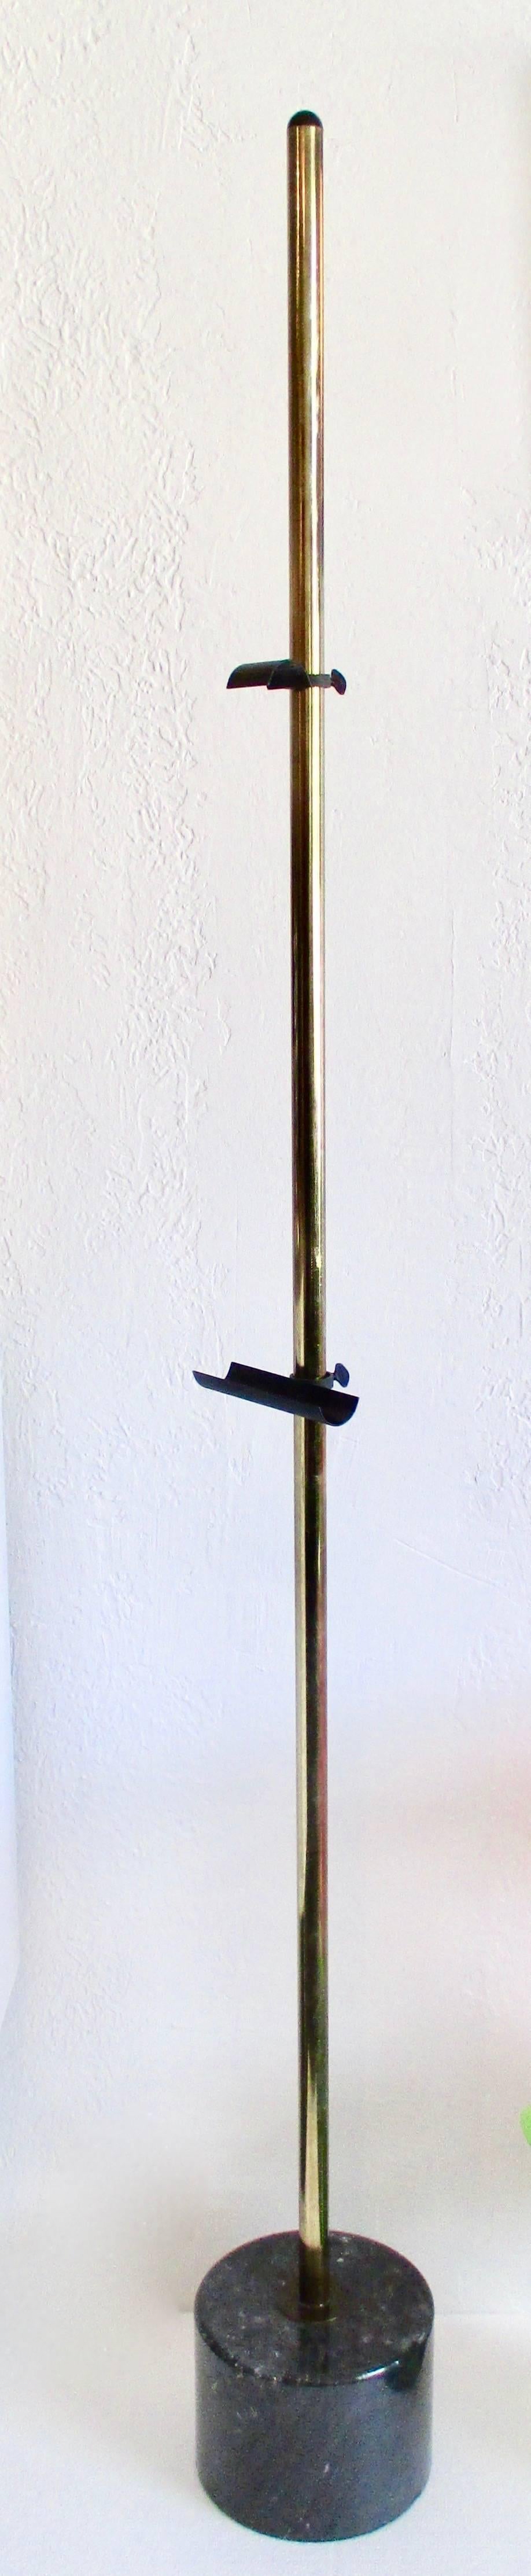 Curtis Jere / Artisan House, adjustable display easel, brass finish
with solid marble base, circa 1970.
 